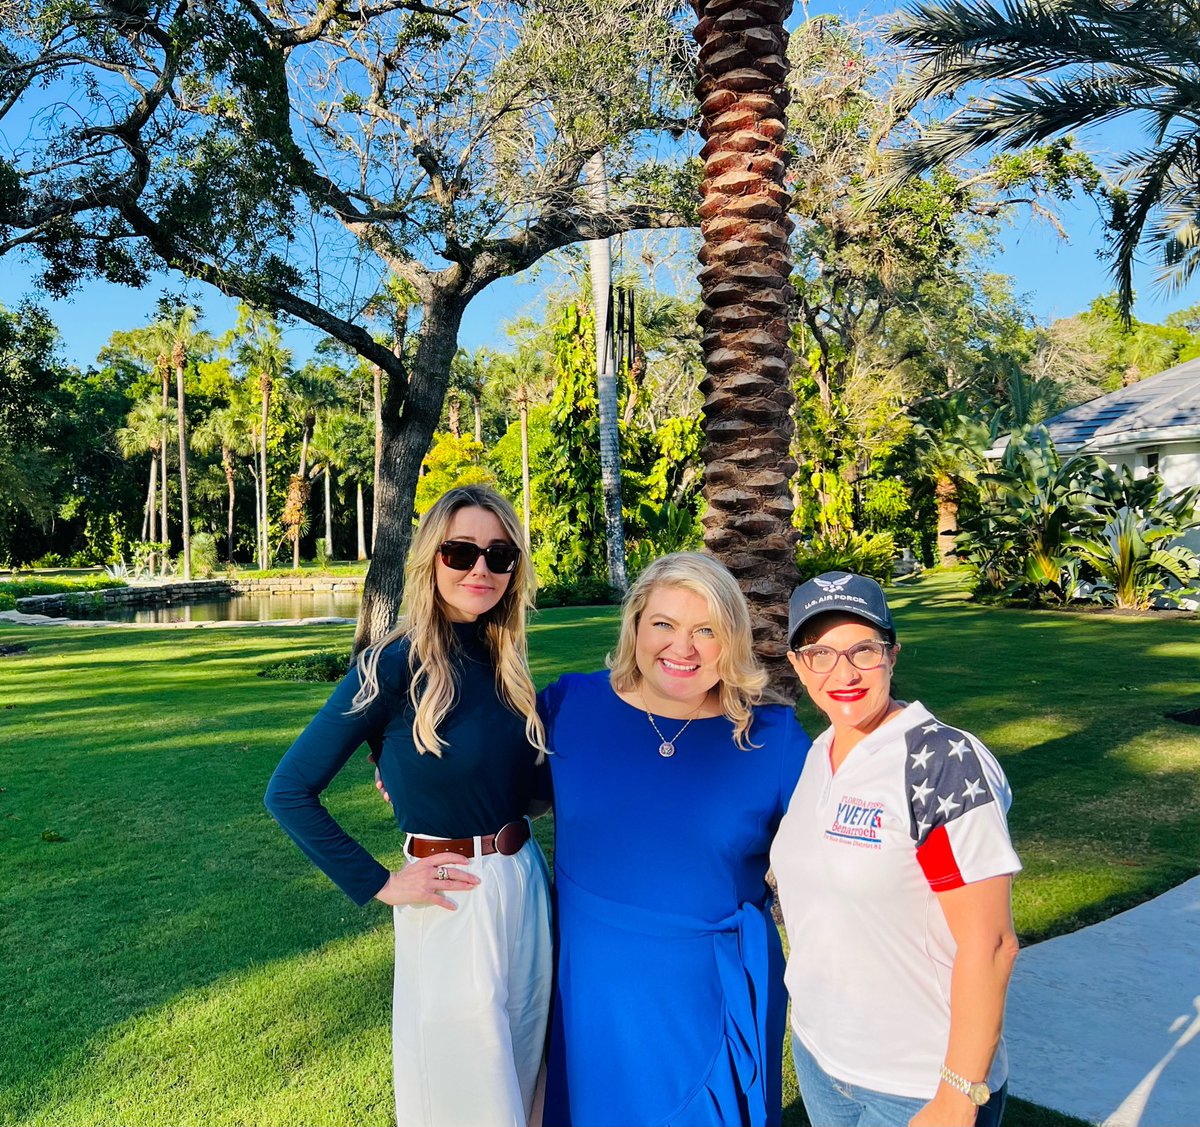 Thankful for the invite to @Kat_Cammack's event! 🌟 Inspired by her vision for our community. As a FL House candidate, I'm committed to positive change. Let's work together for a brighter future! 💪 #CommunityEngagement #KatCammack #FLHouse #Gratitude #YvetteforFlorida #FlaPol I